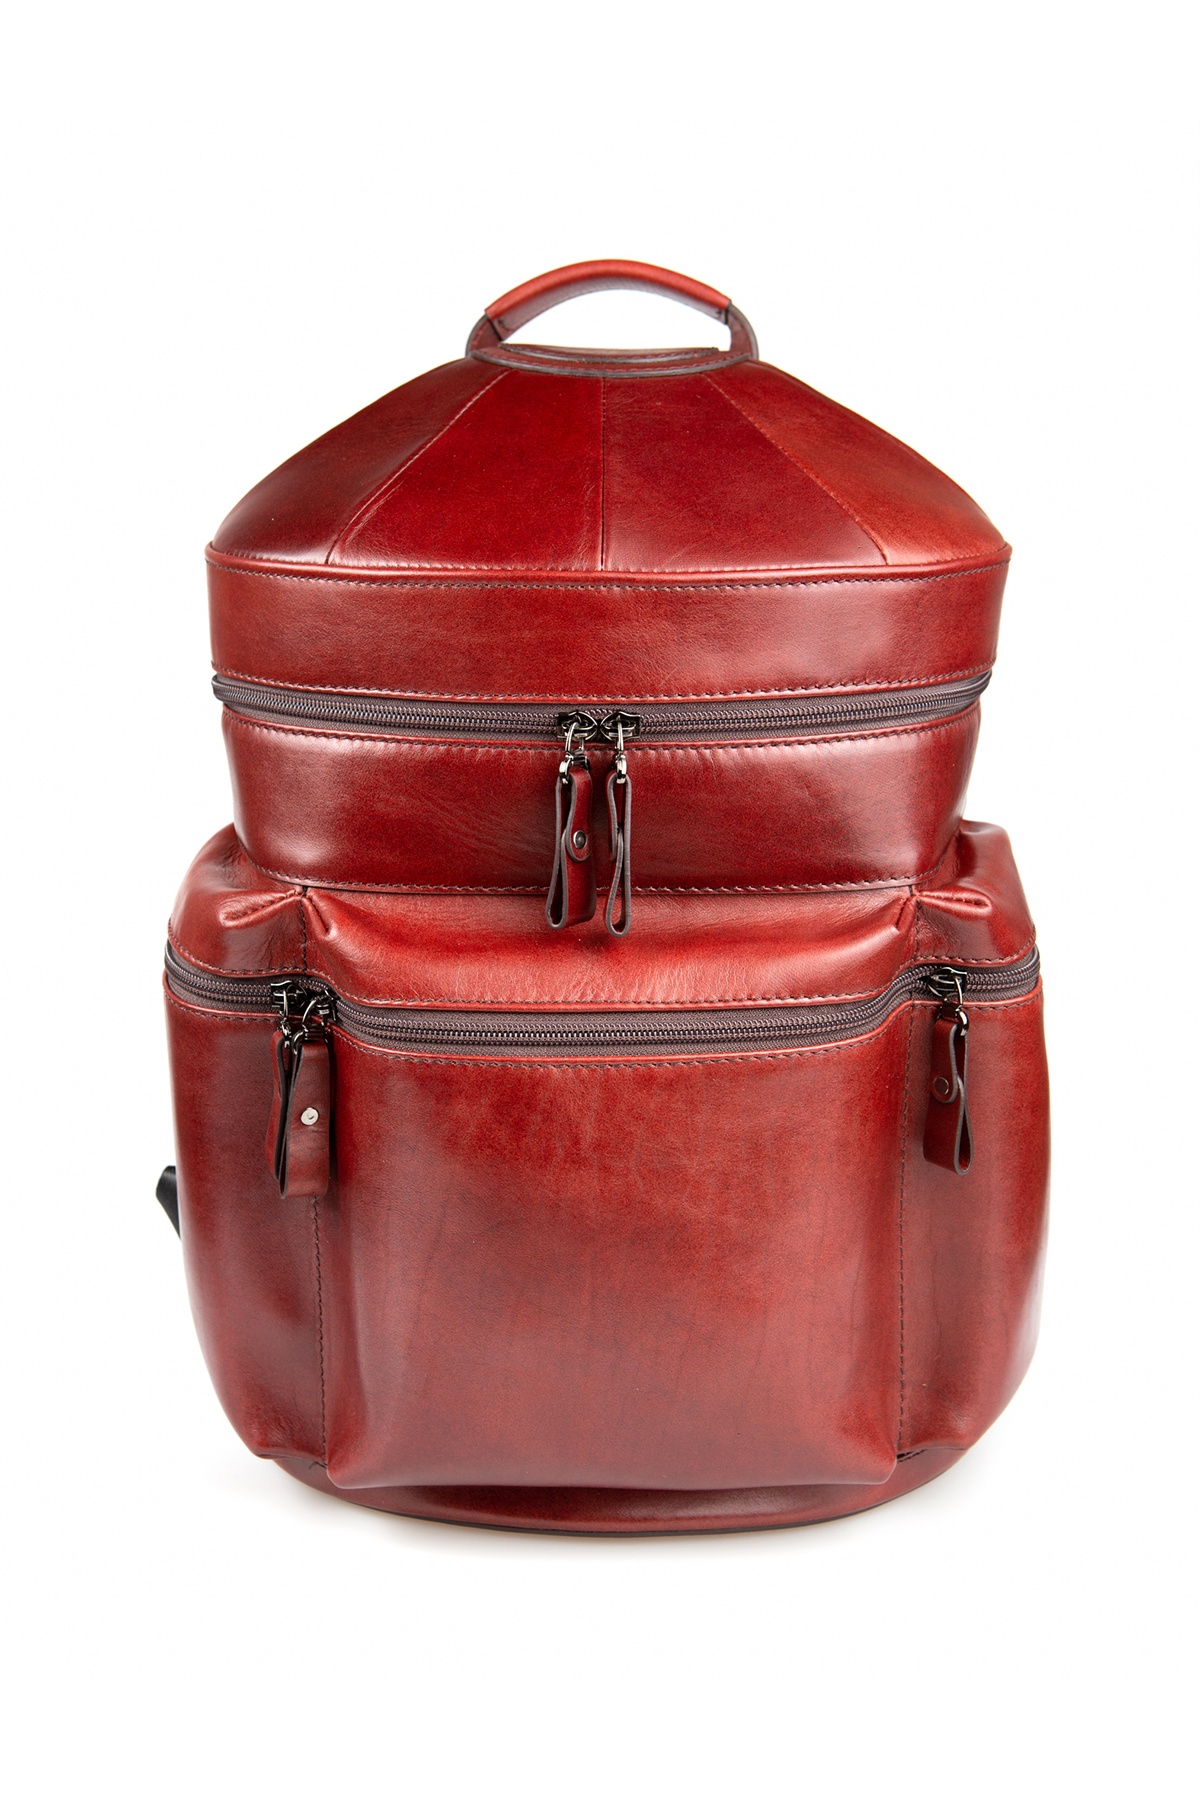 A genuine leather backpack seen from the front view